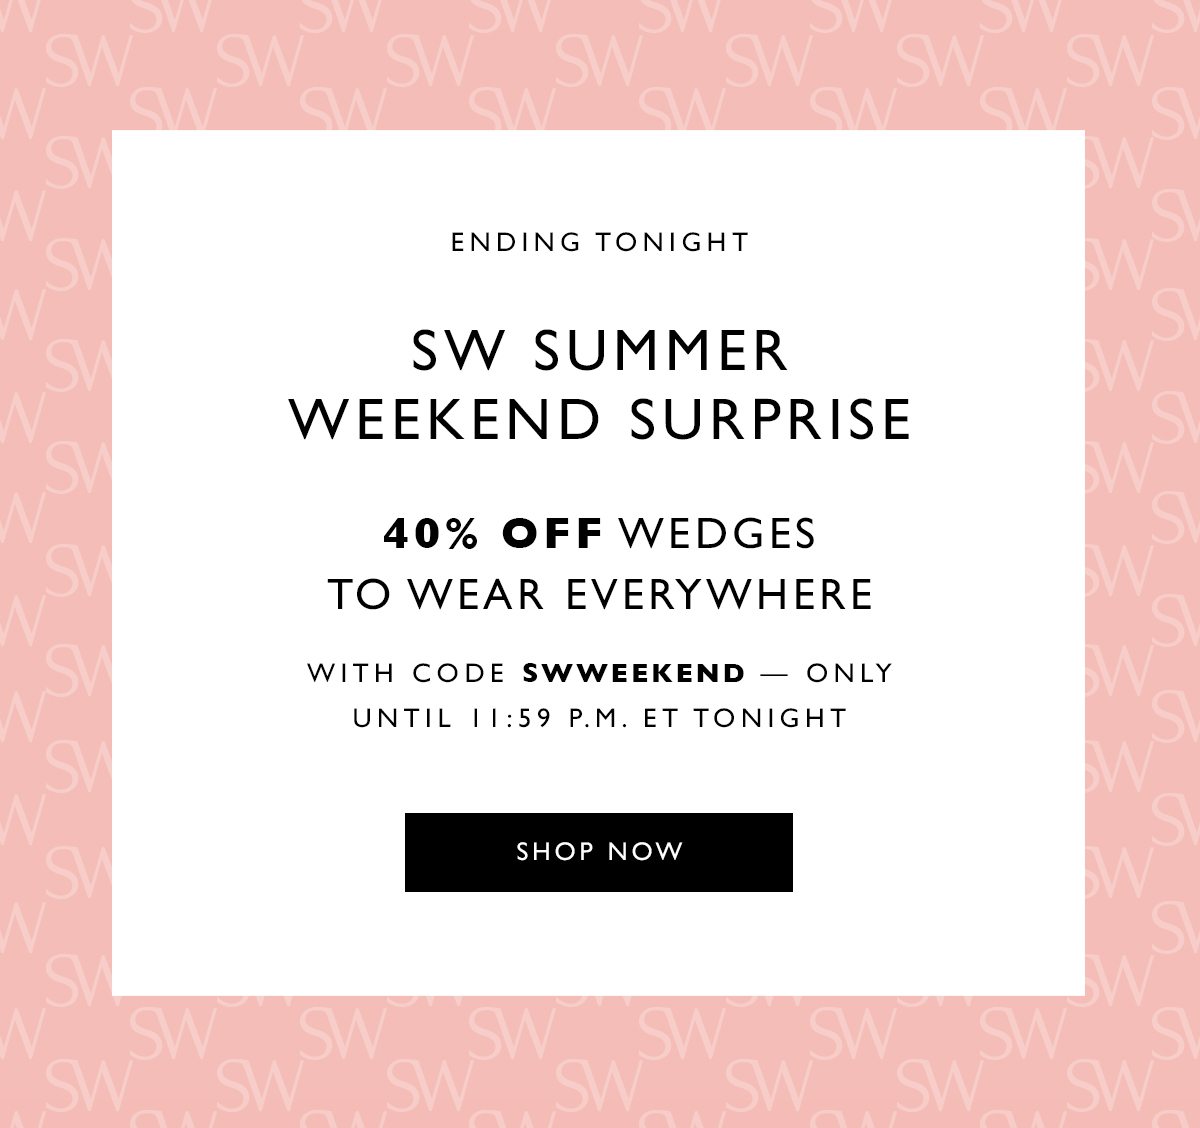 Ending Tonight. SW Summer Weekend Surprise. 40% Off wedges to wear everywhere with code SWWEEKEND only through 11:59 P.M. ET tonight. SHOP NOW